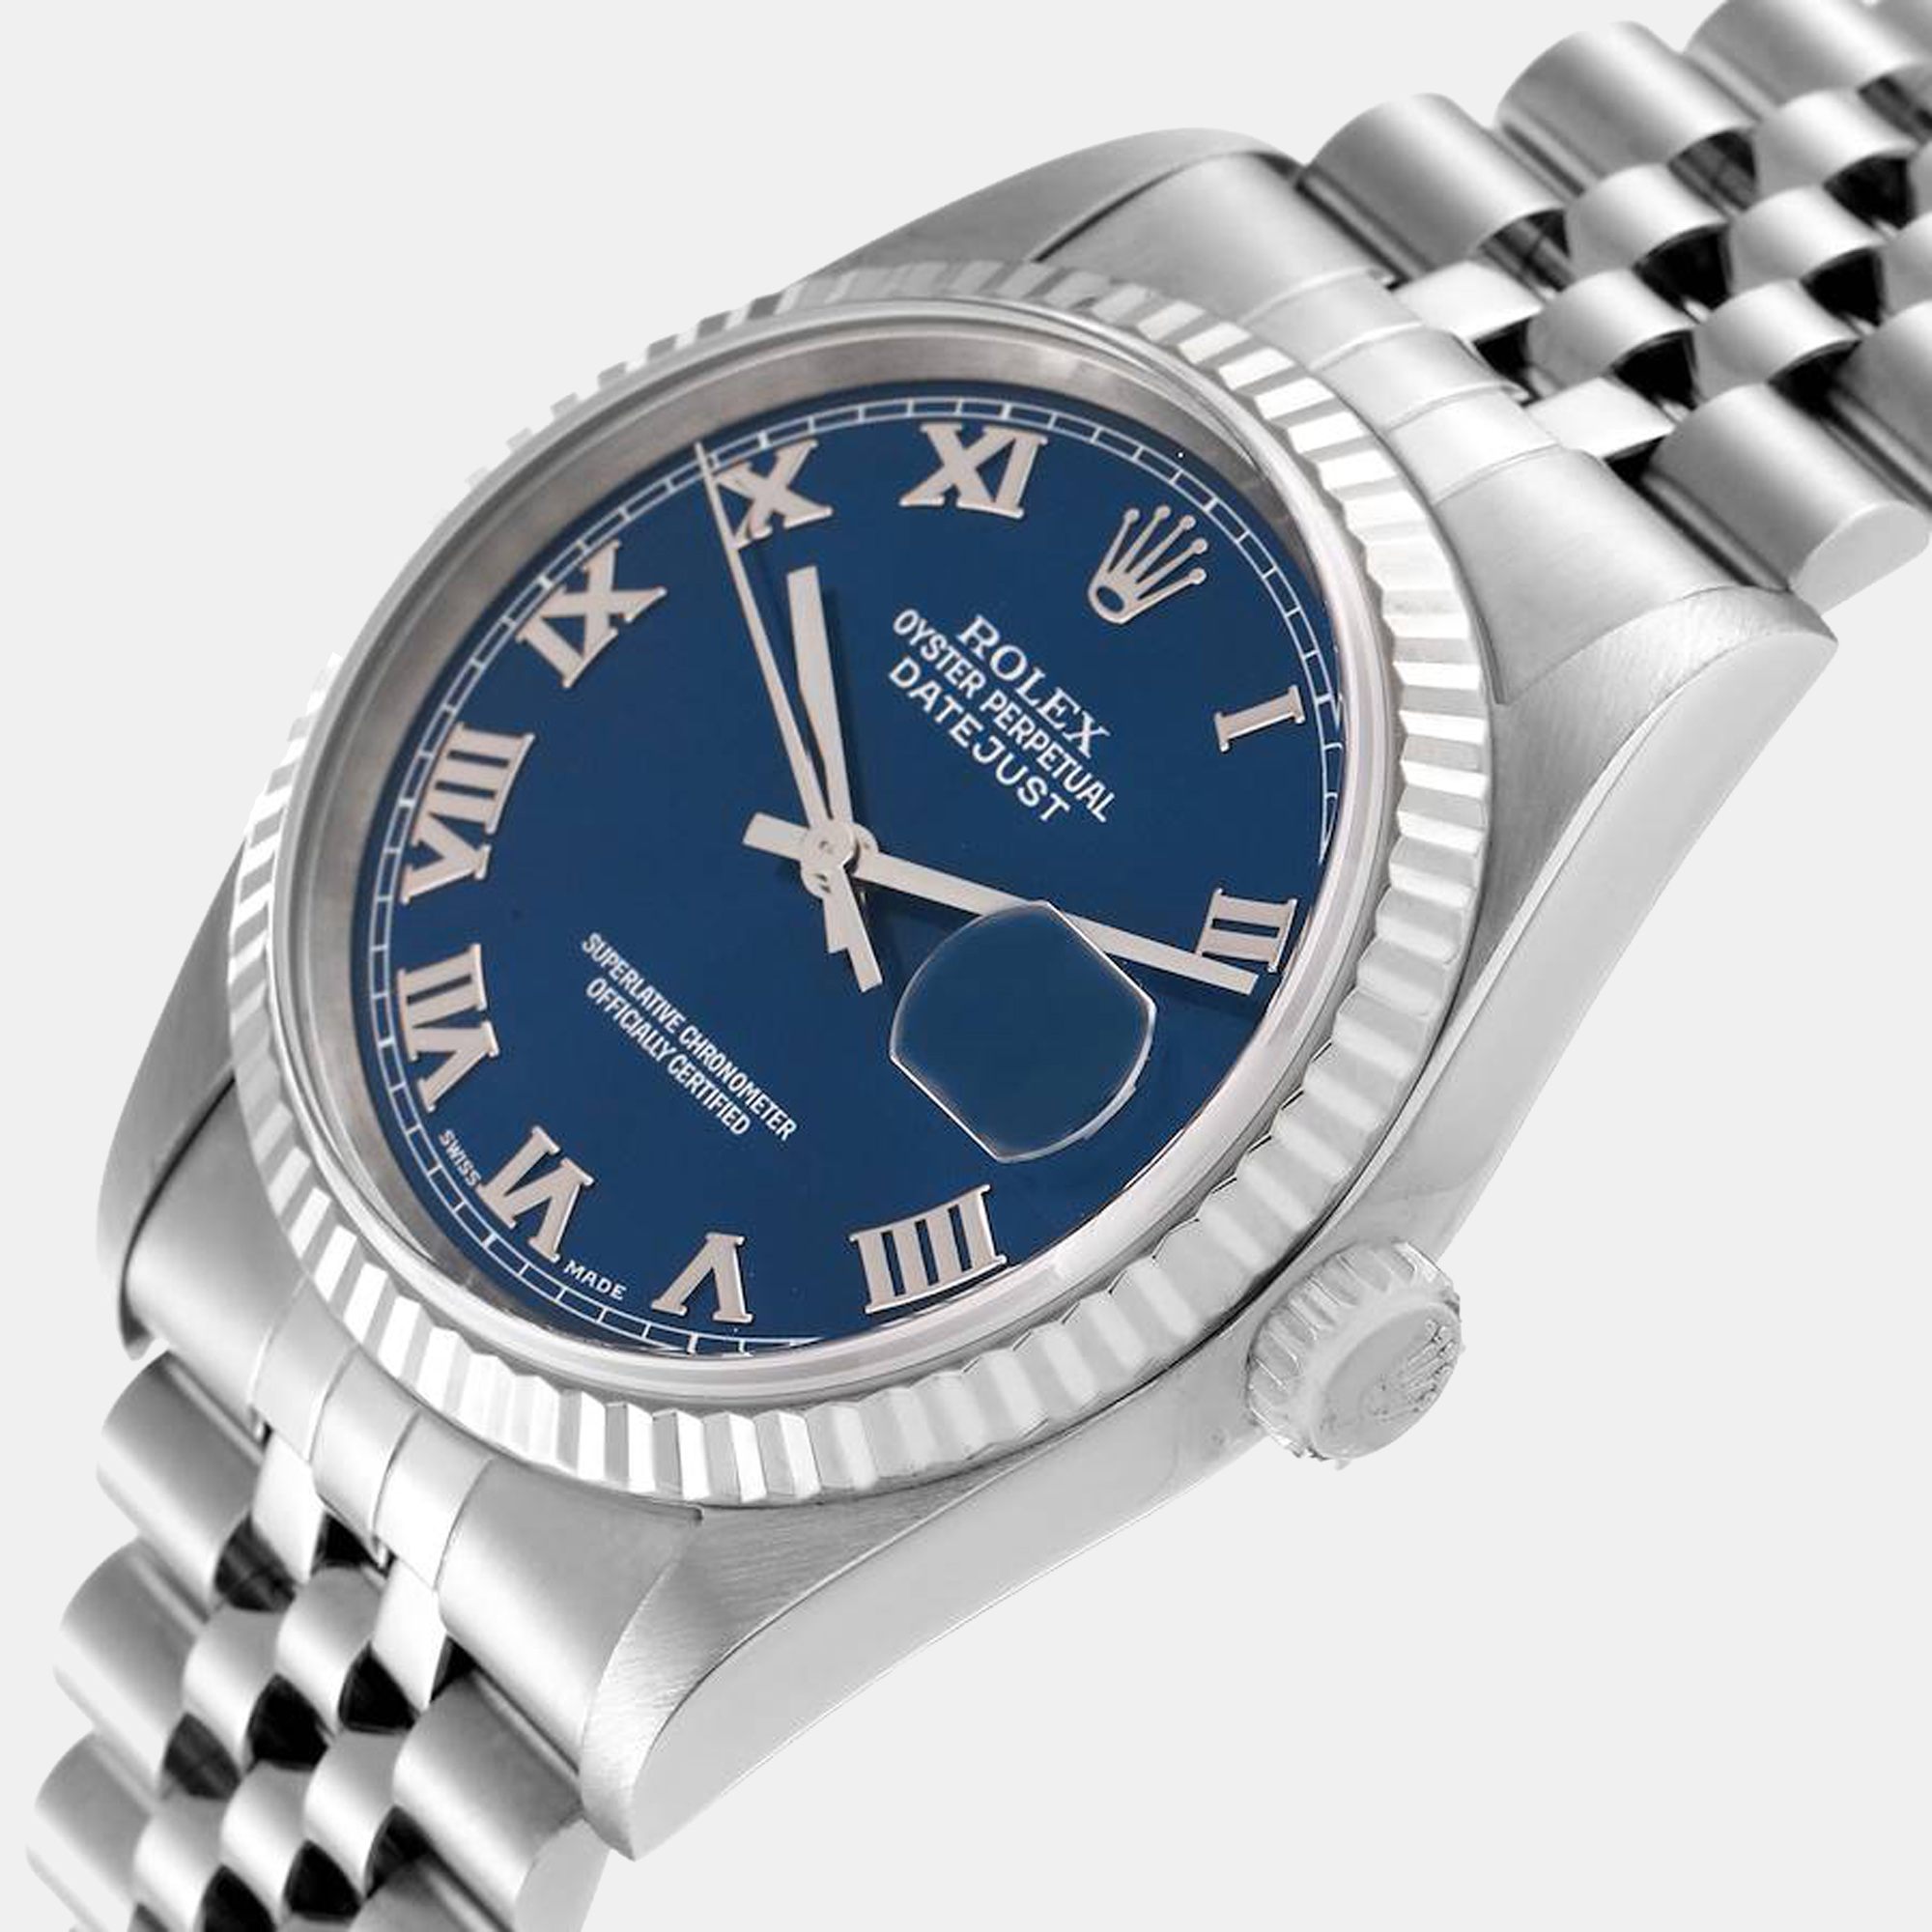 

Rolex Blue 18k White Gold And Stainless Steel Datejust 16234 Automatic Men's Wristwatch 36 mm